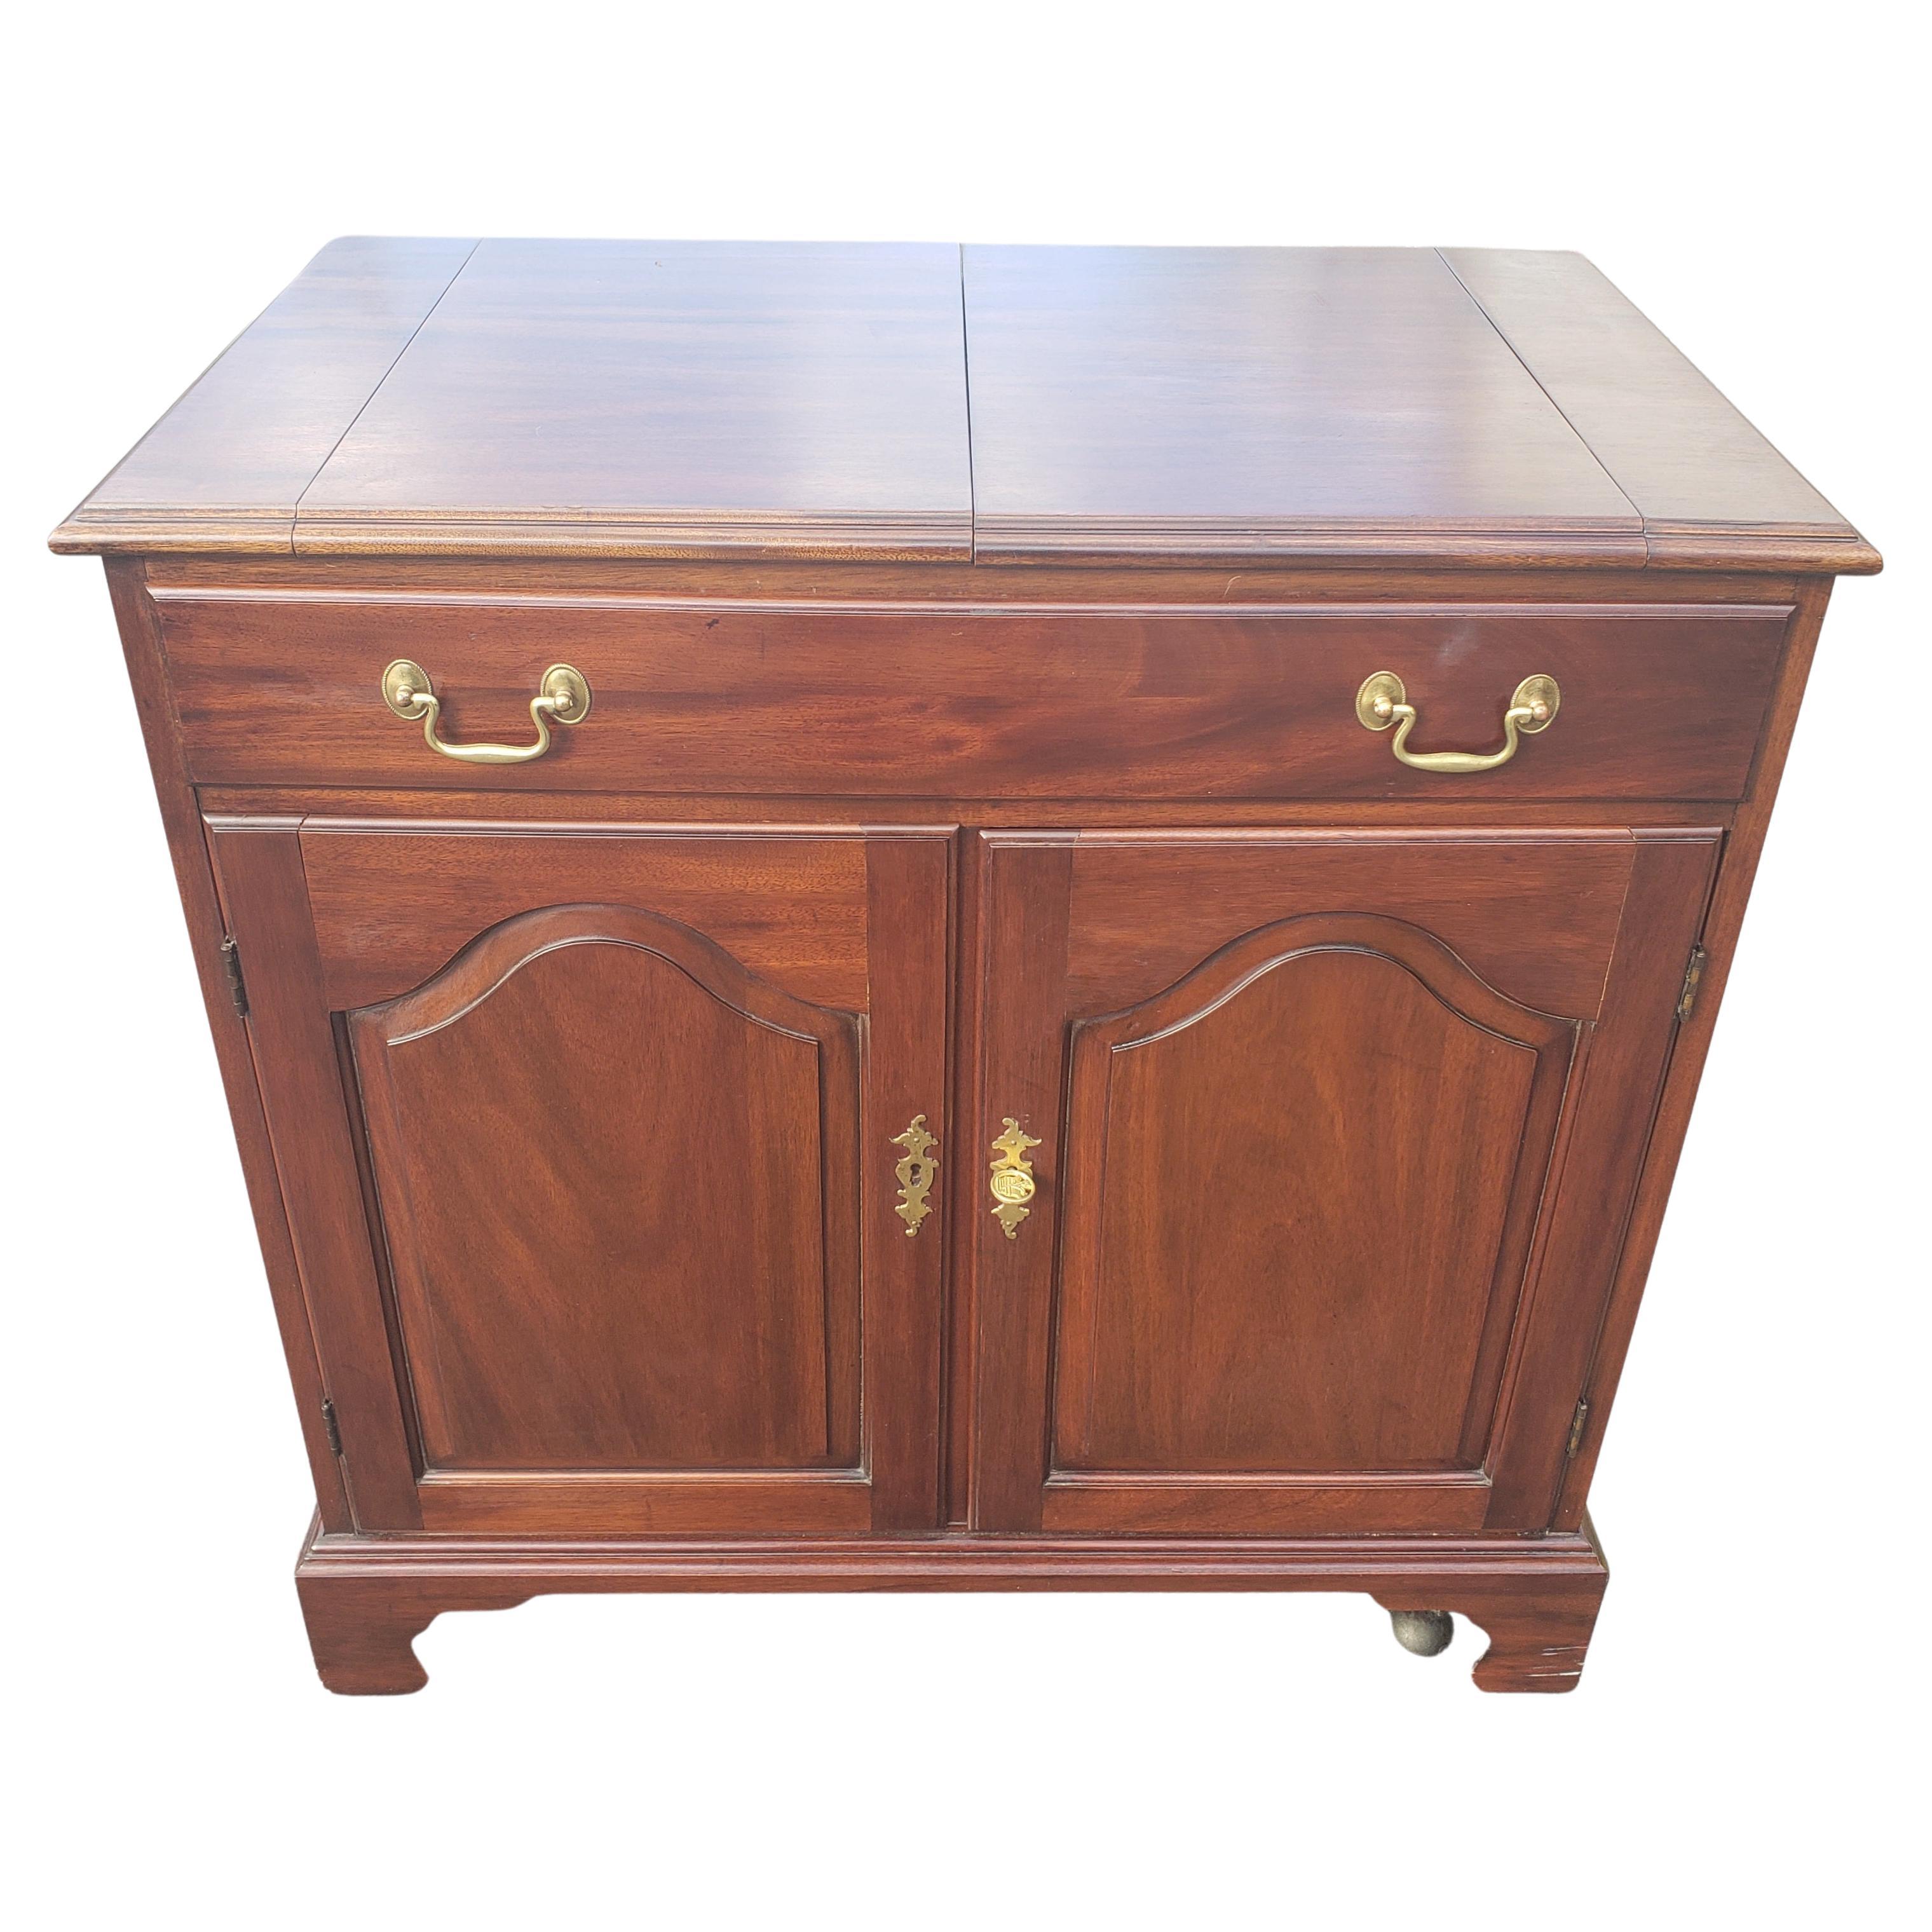 Solid Mahogany dry bar and buffet server by Henkel Harris. 
It features one large compartmented dovetailed drawer, a storage compartment with shelf and brass hardware.
On Very solid rolling casters . Very good vintage condition.
Measures 34